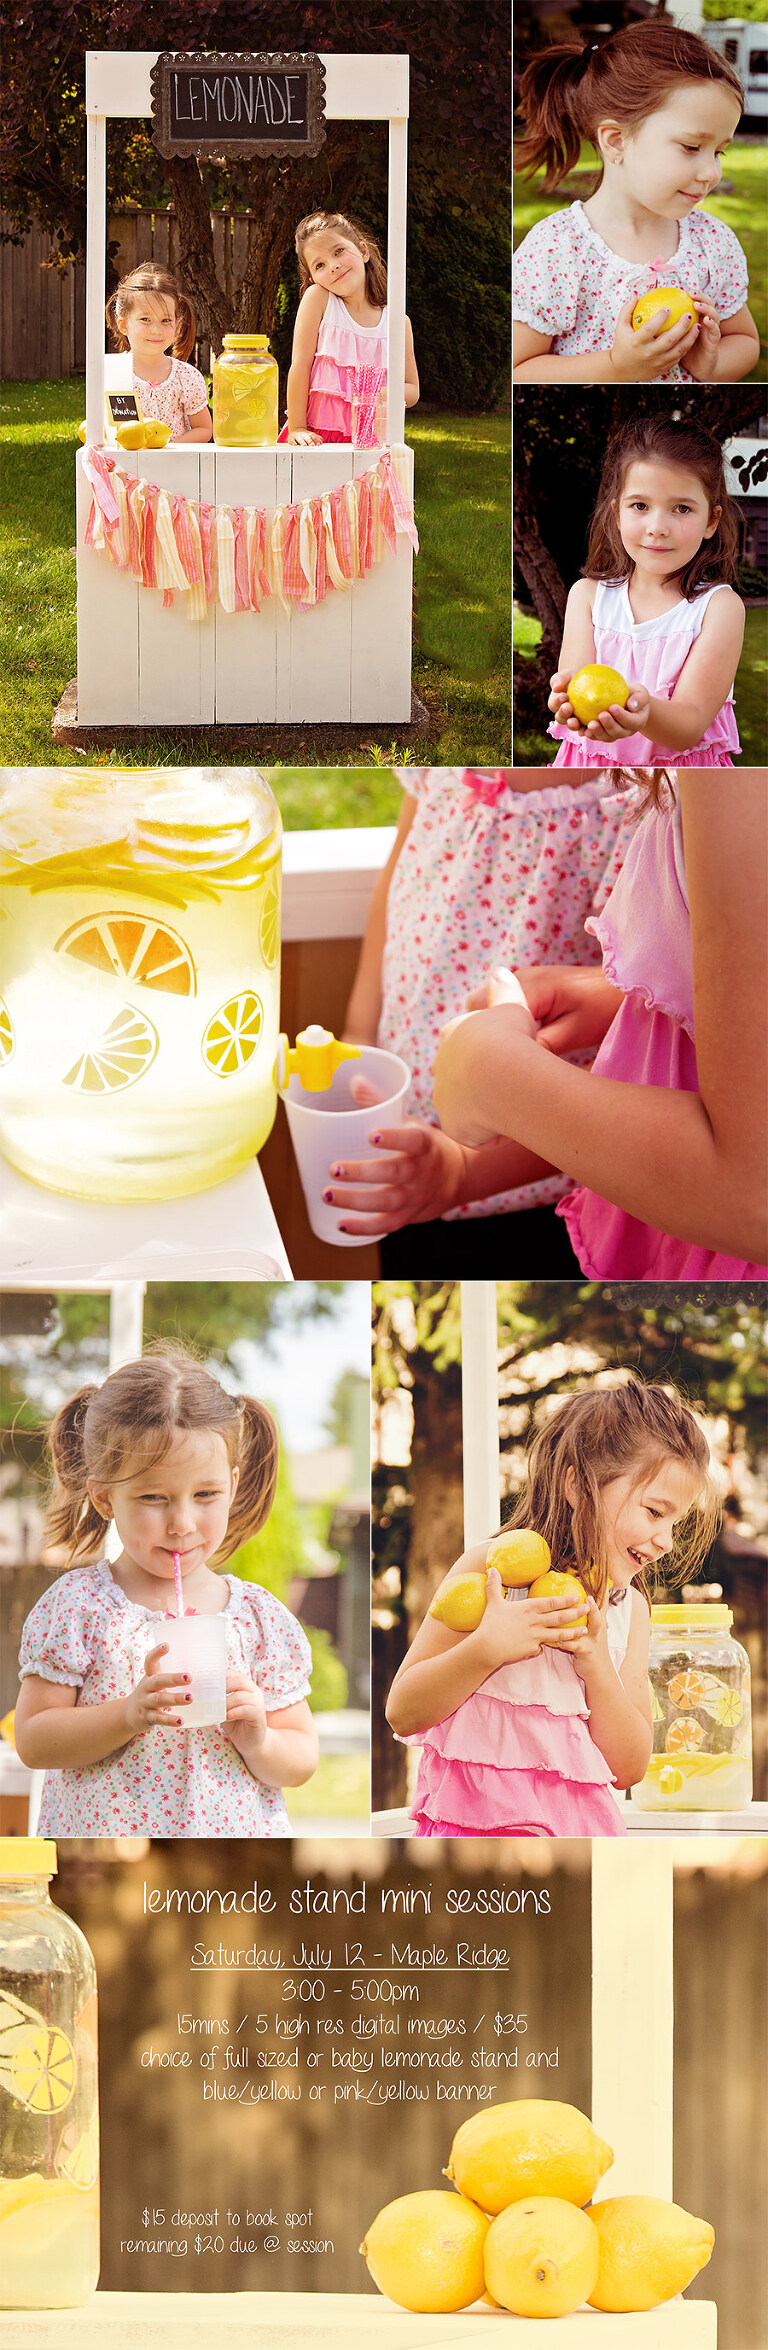 lemonade stand mini sessions / melissa auer photography / copyright 2014